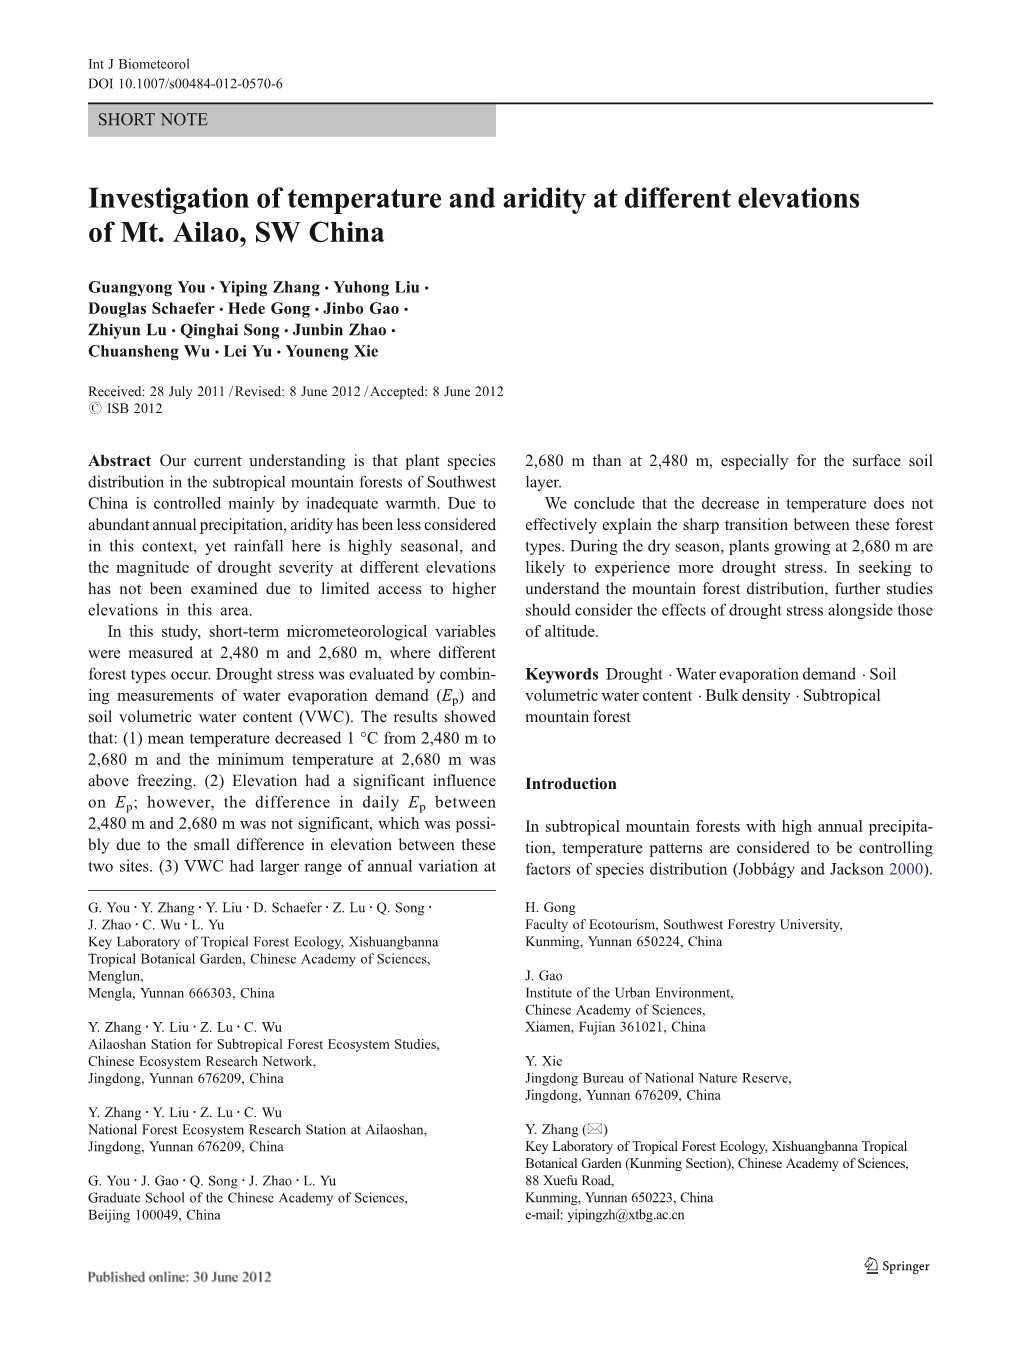 Investigation of Temperature and Aridity at Different Elevations of Mt